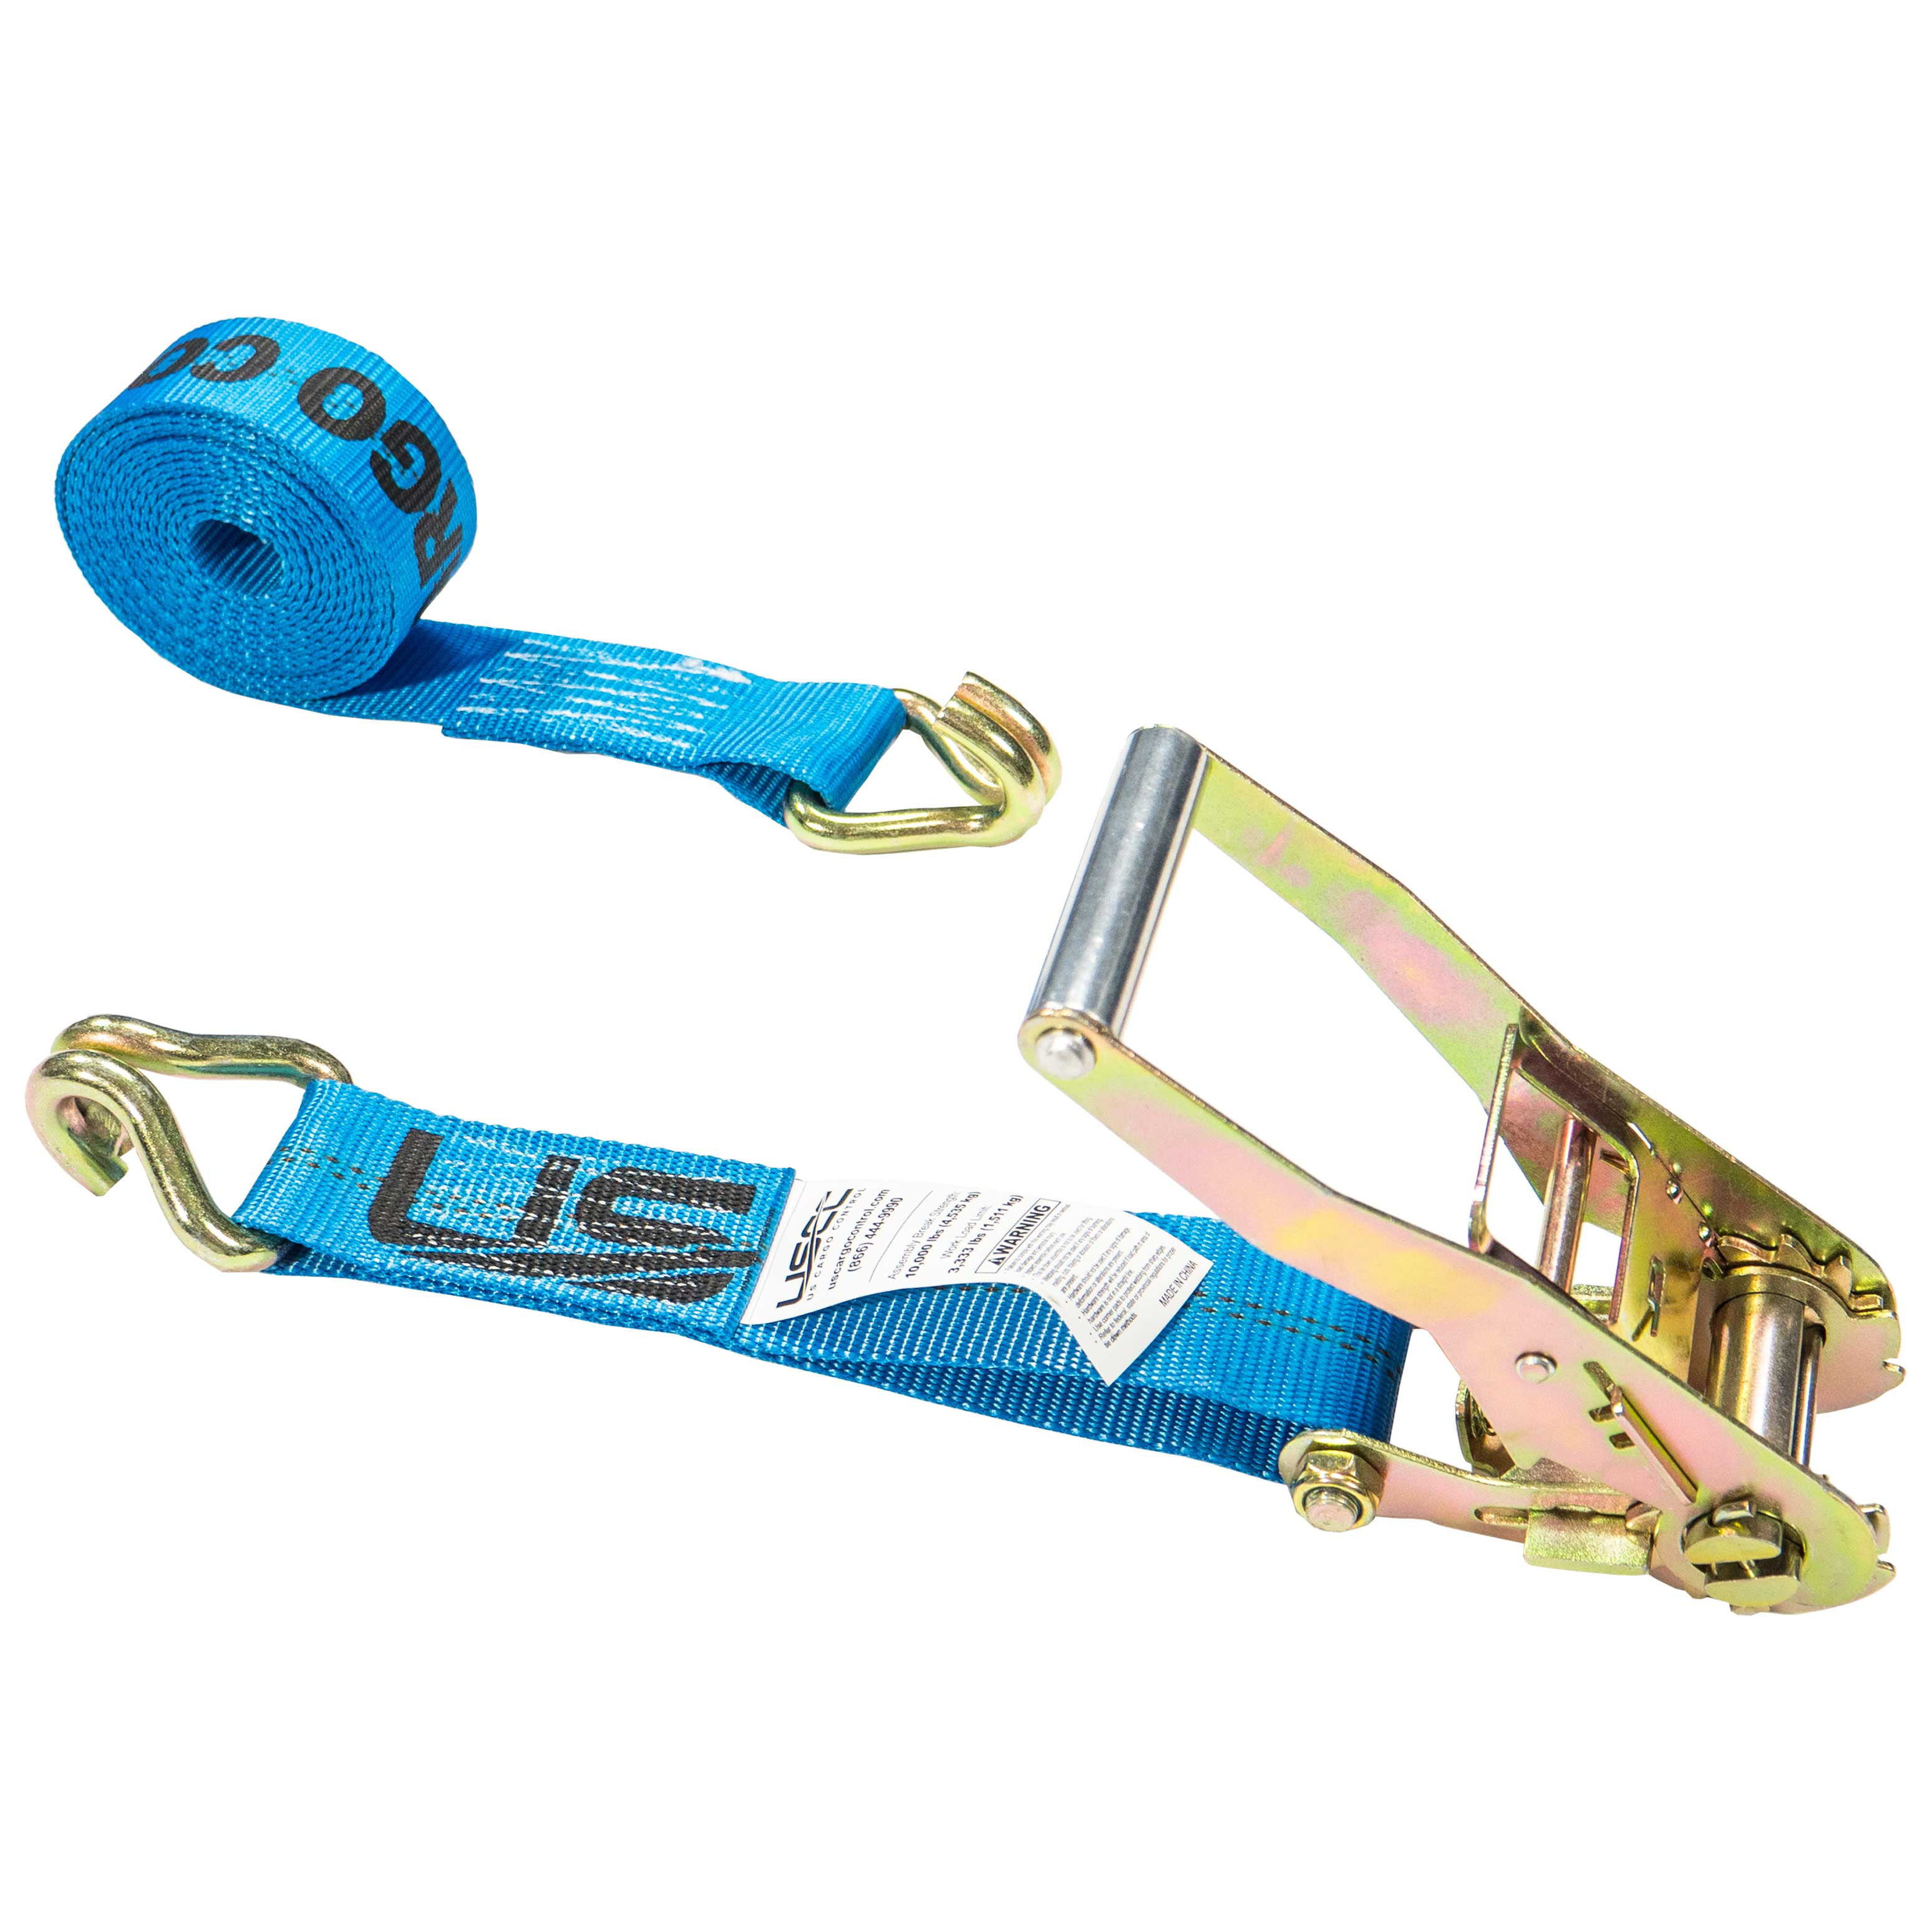 New Ratchet Tie-down Straps With J-hooks Security Furniture Transport Carrying 